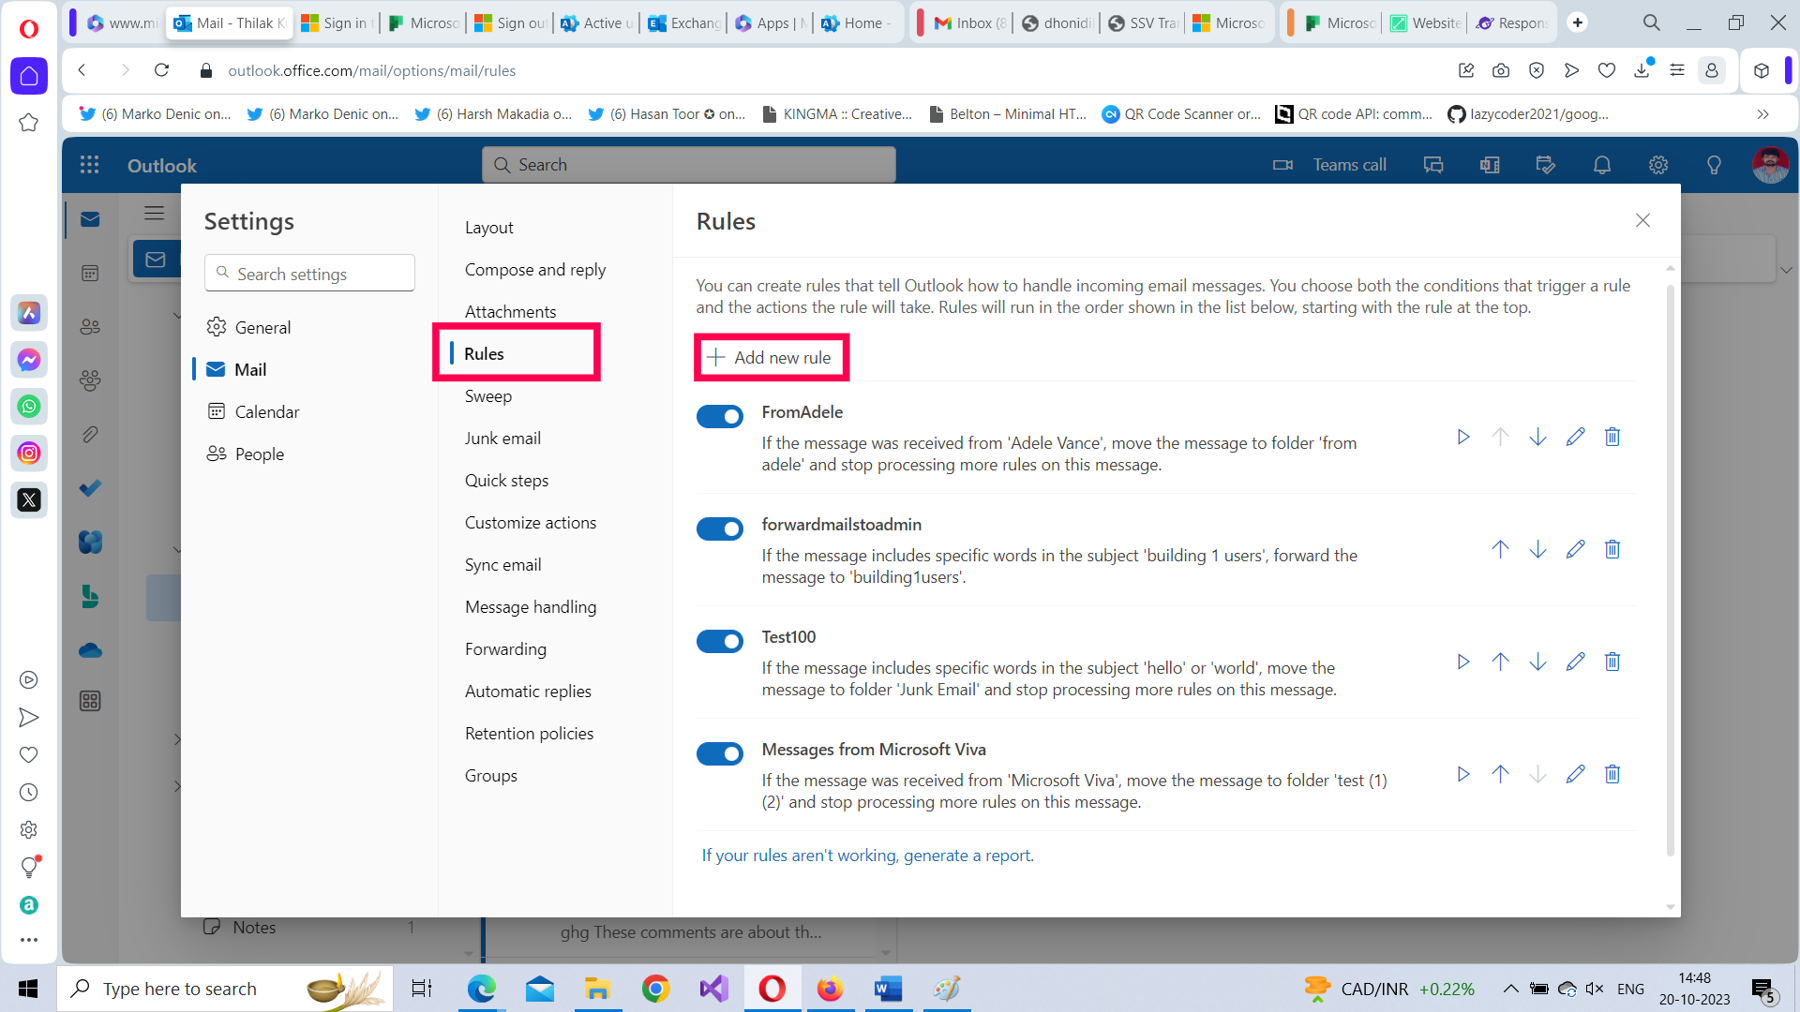 This screenshot shows how you can add an inbox rule in the settings pane of Microsoft 365 Outlook on the web.